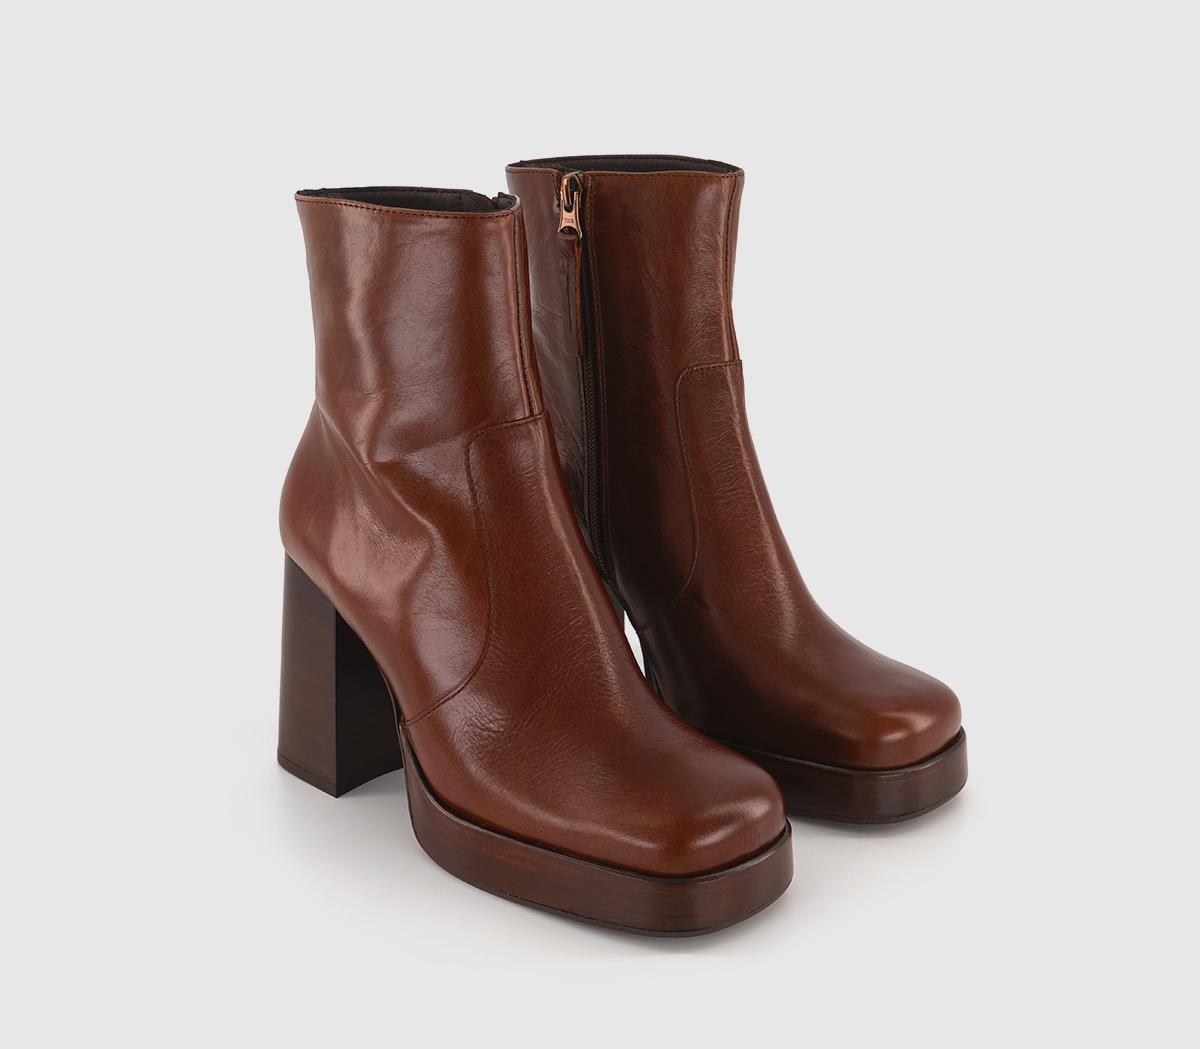 OFFICE Arlo Heeled Platform Boots Choc Brown Leather - Women's Ankle Boots